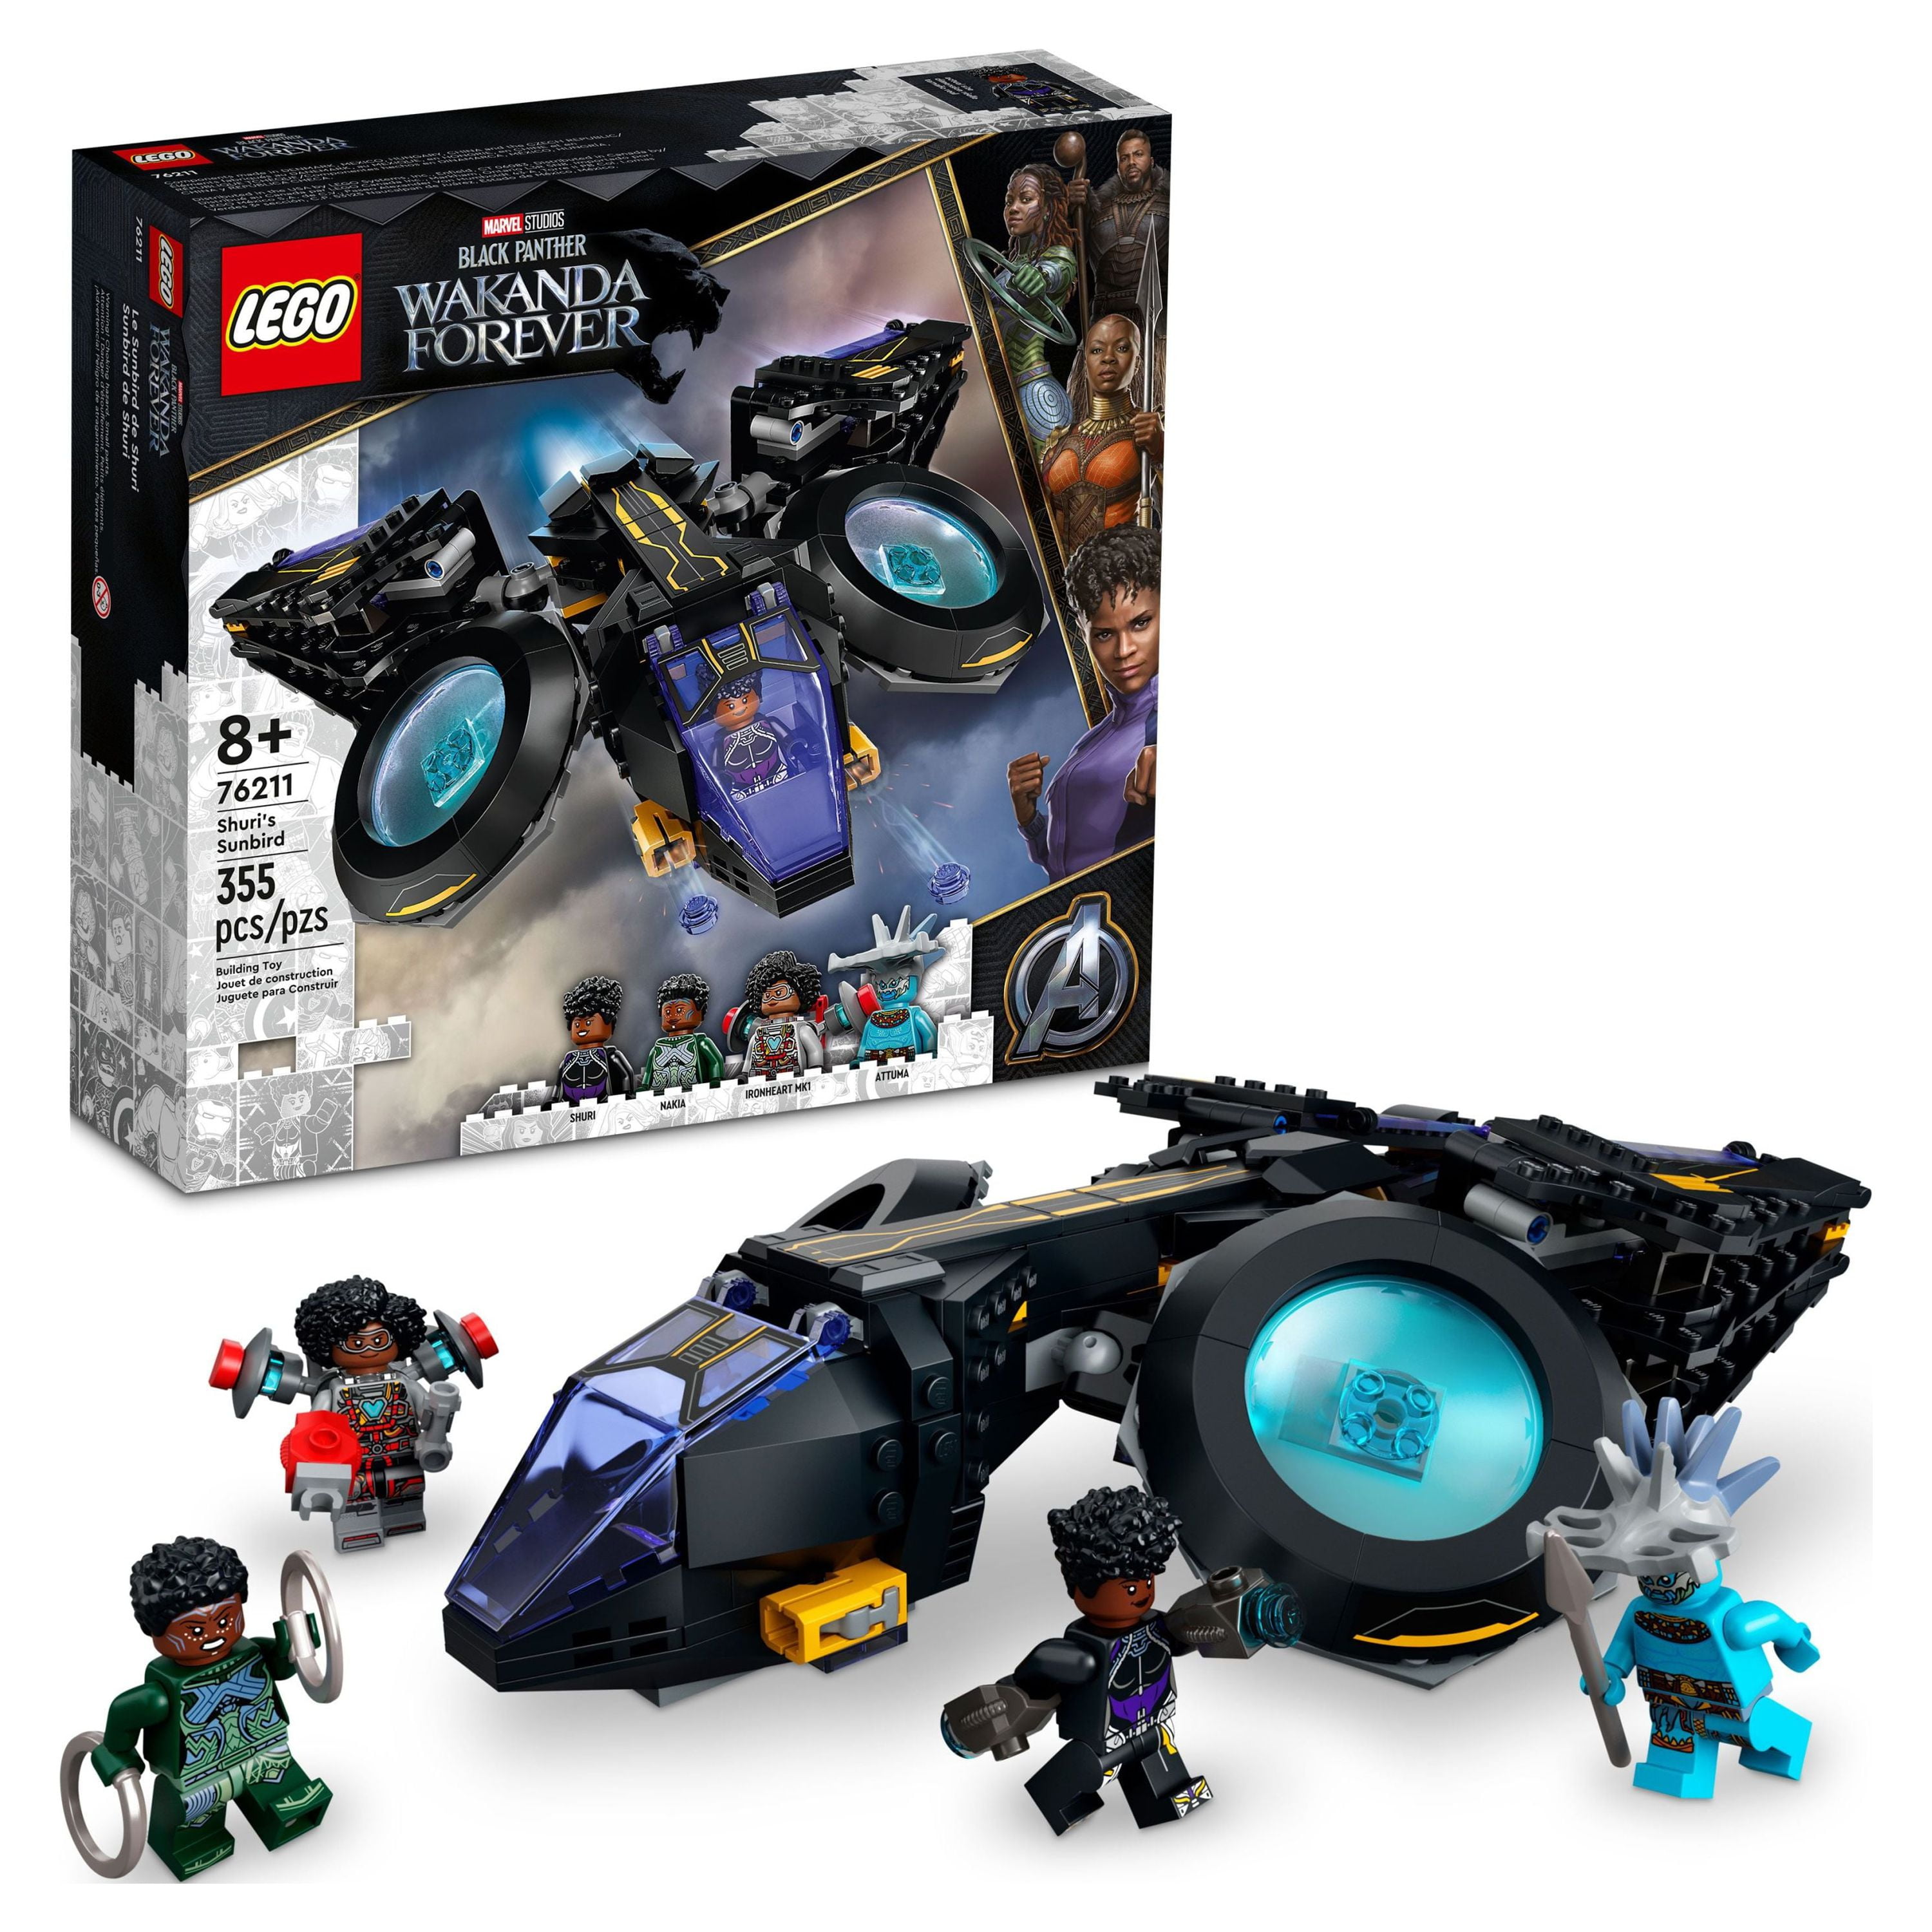 LEGO Marvel Black Panther set 76210 will launch at $500 this fall